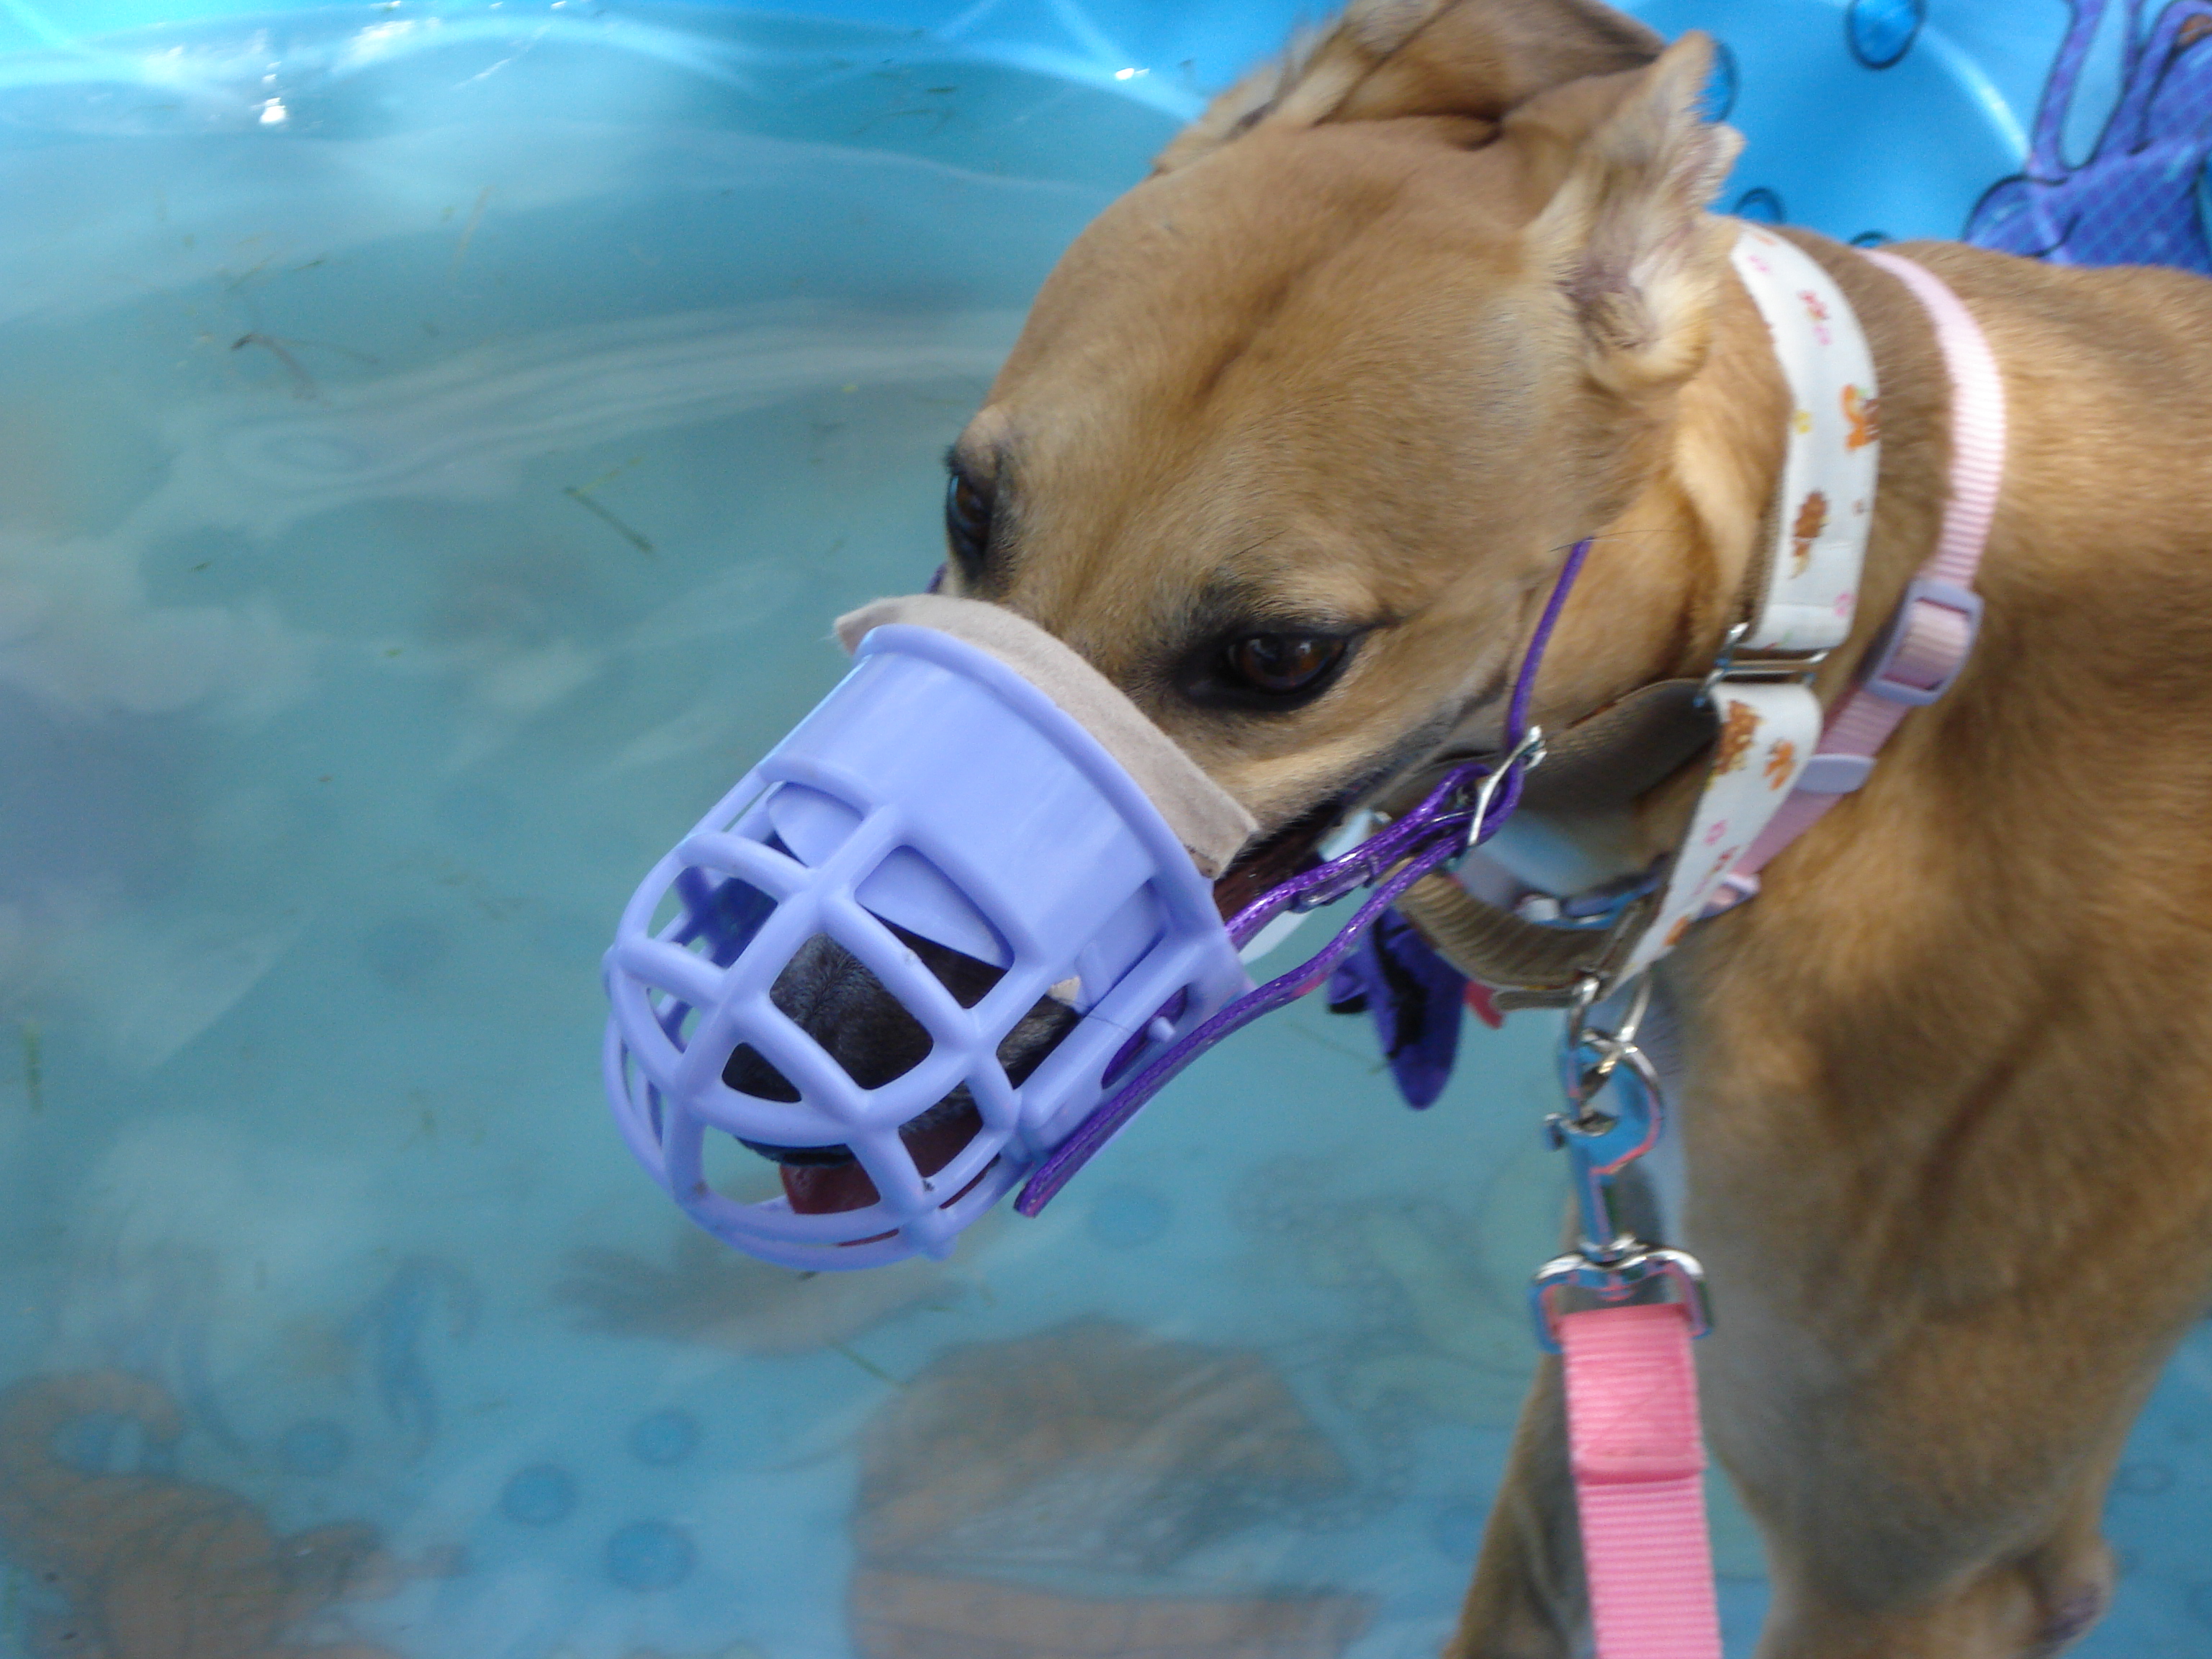 cage muzzle for small dogs